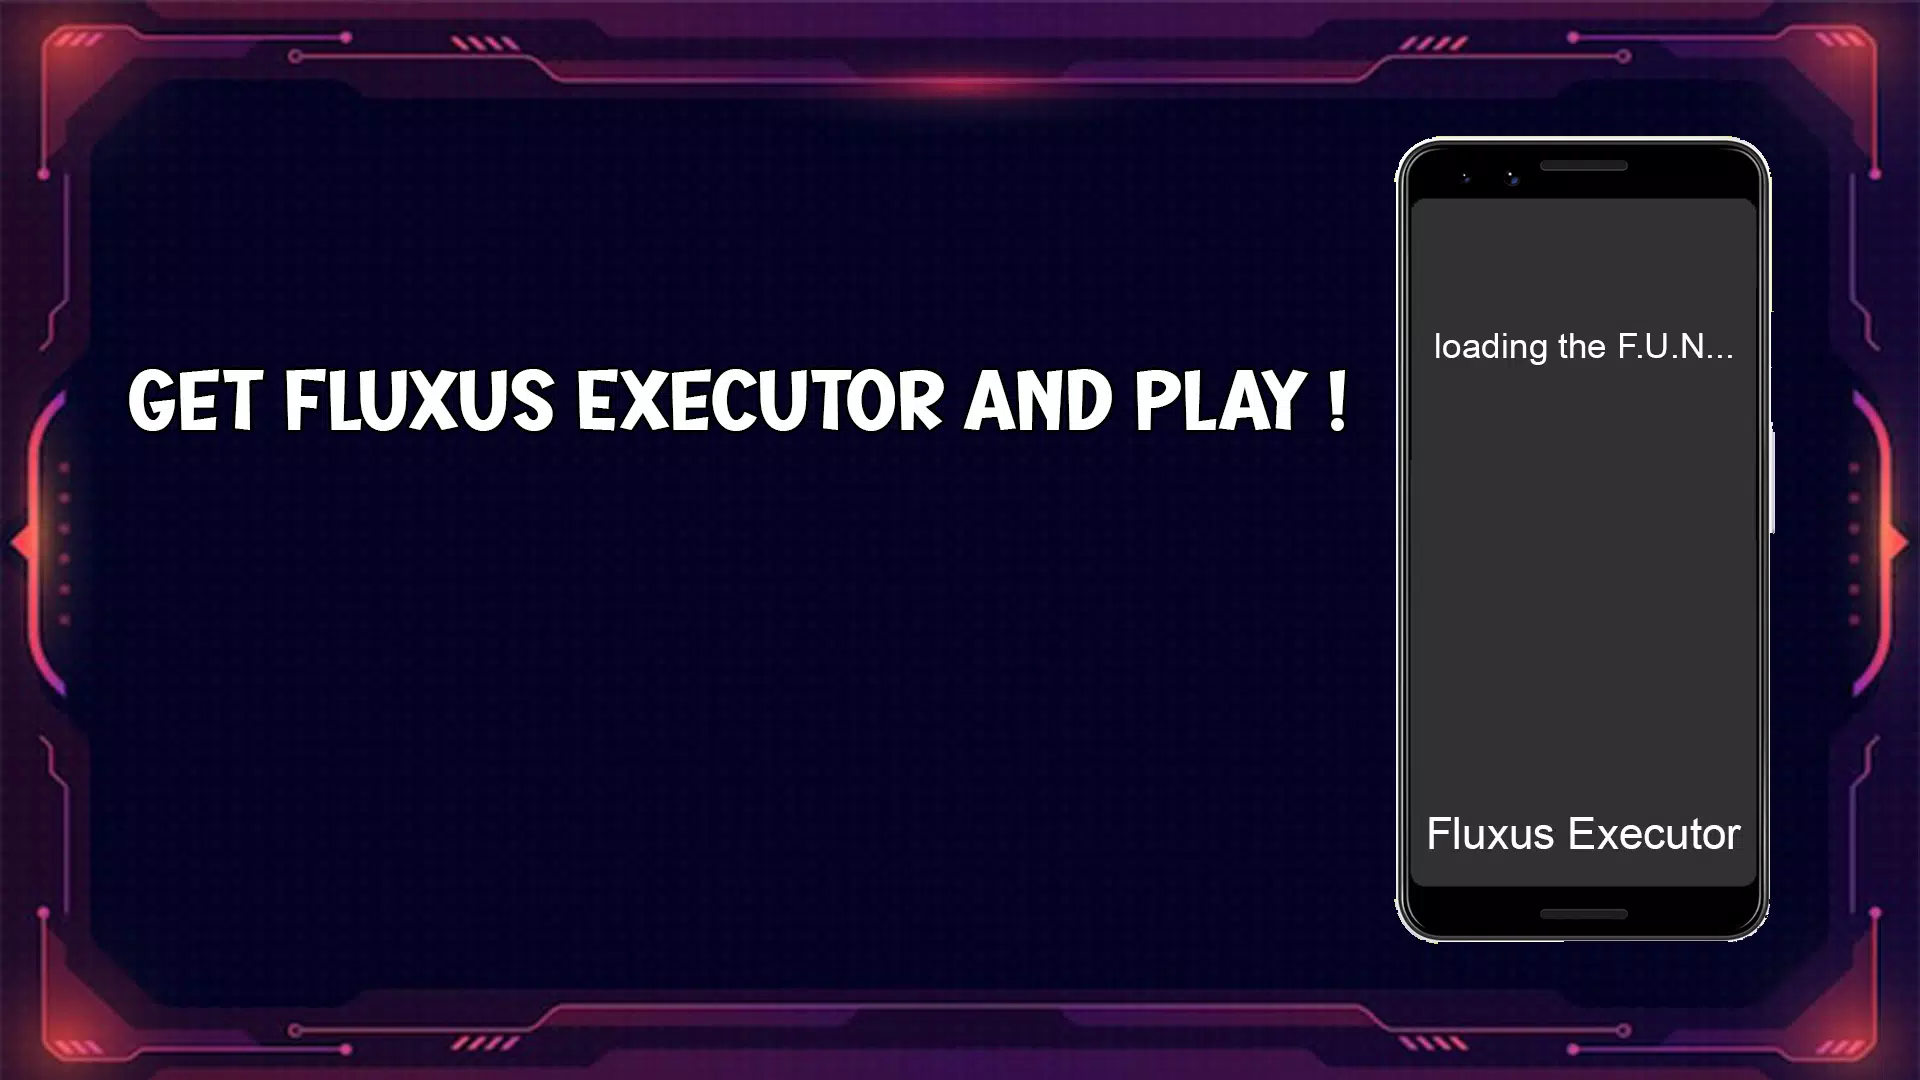 Fluxus Roblox v600 (Android Executor) Download latest version